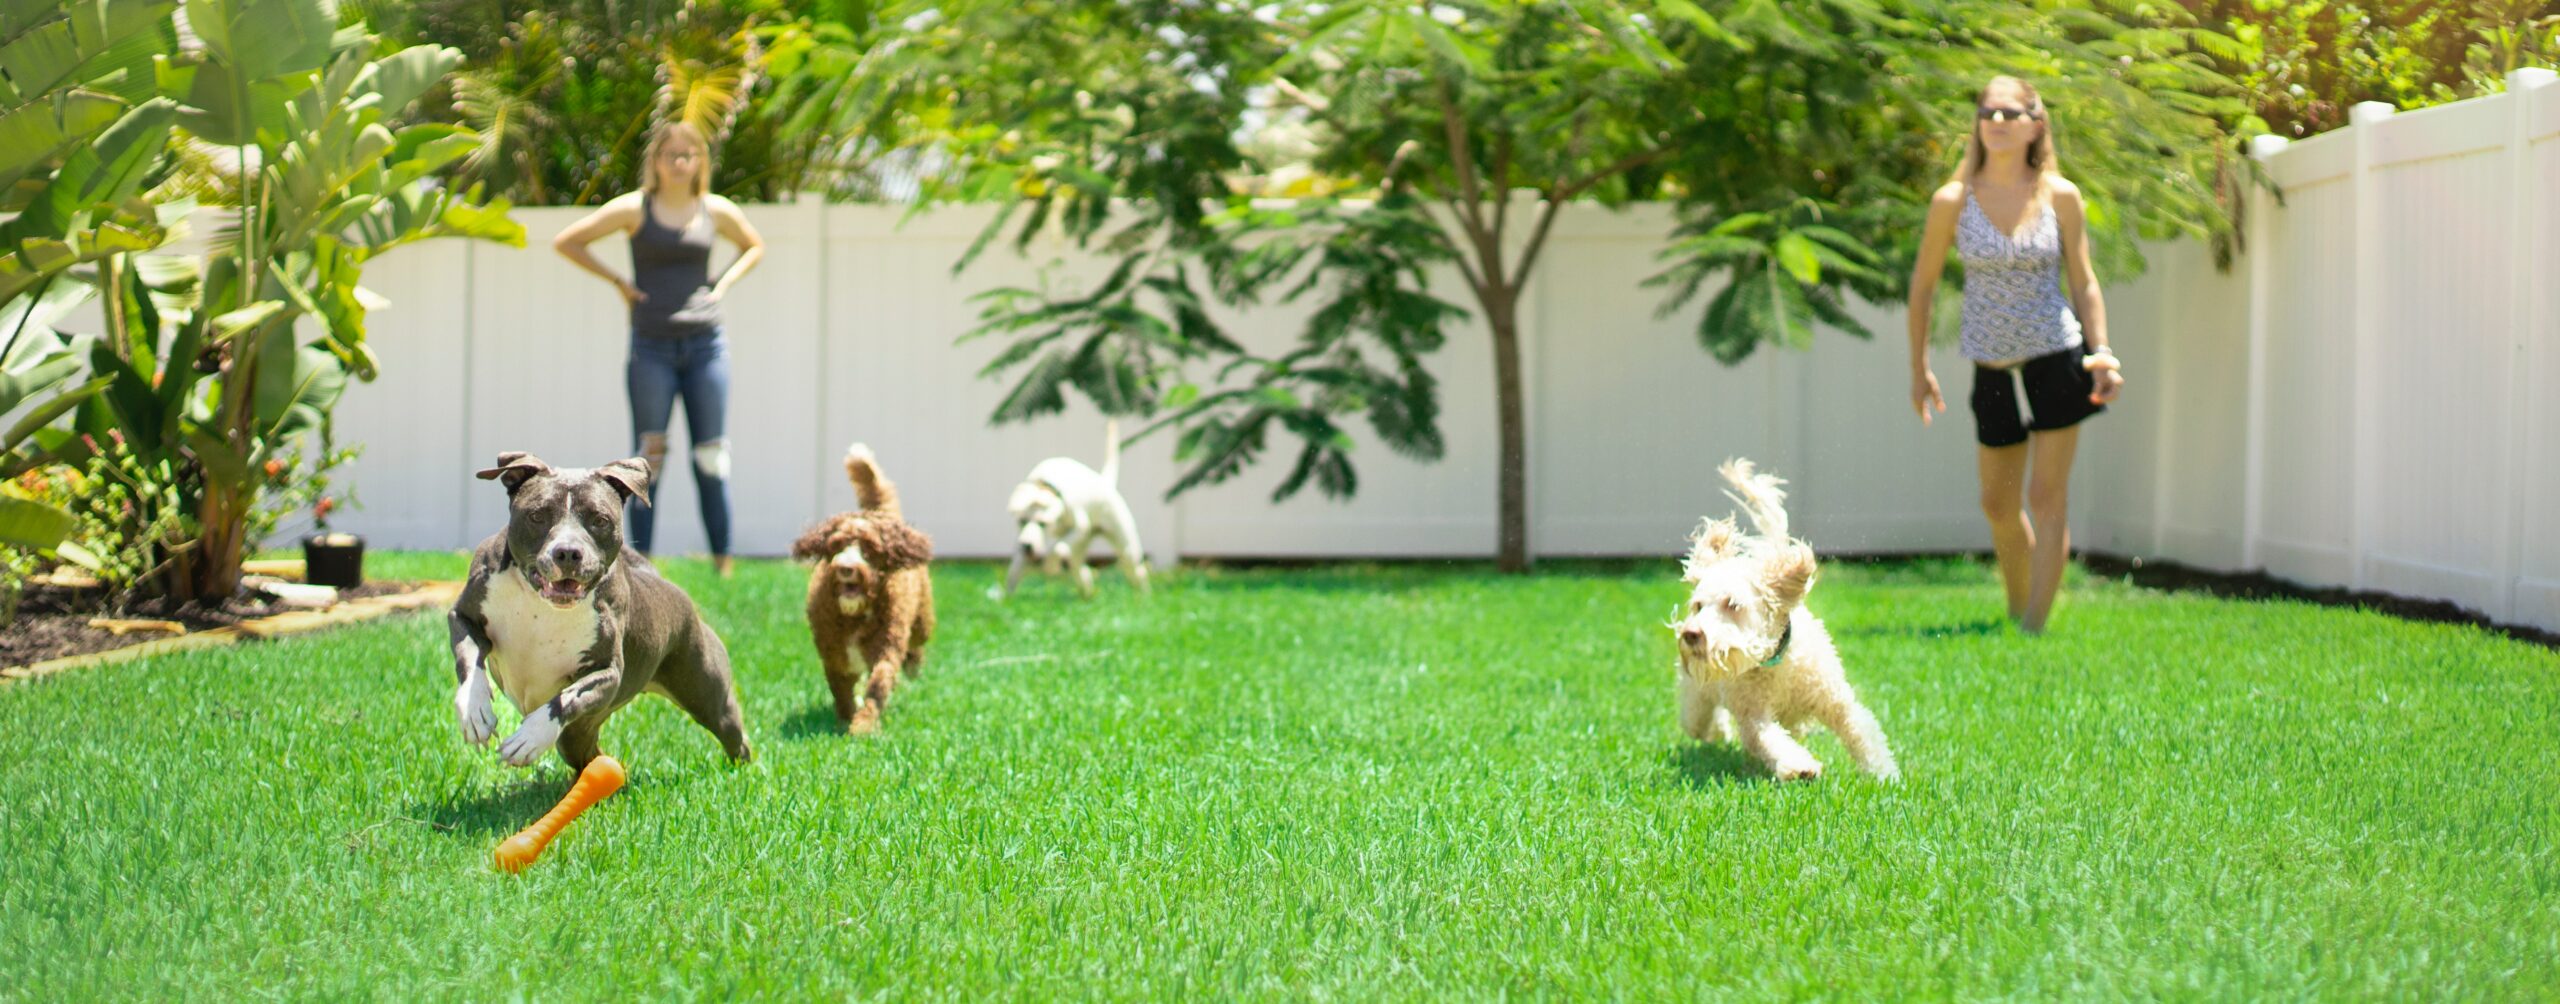 How To Turn Your Backyard Into a Pet Paradise for Your Pup